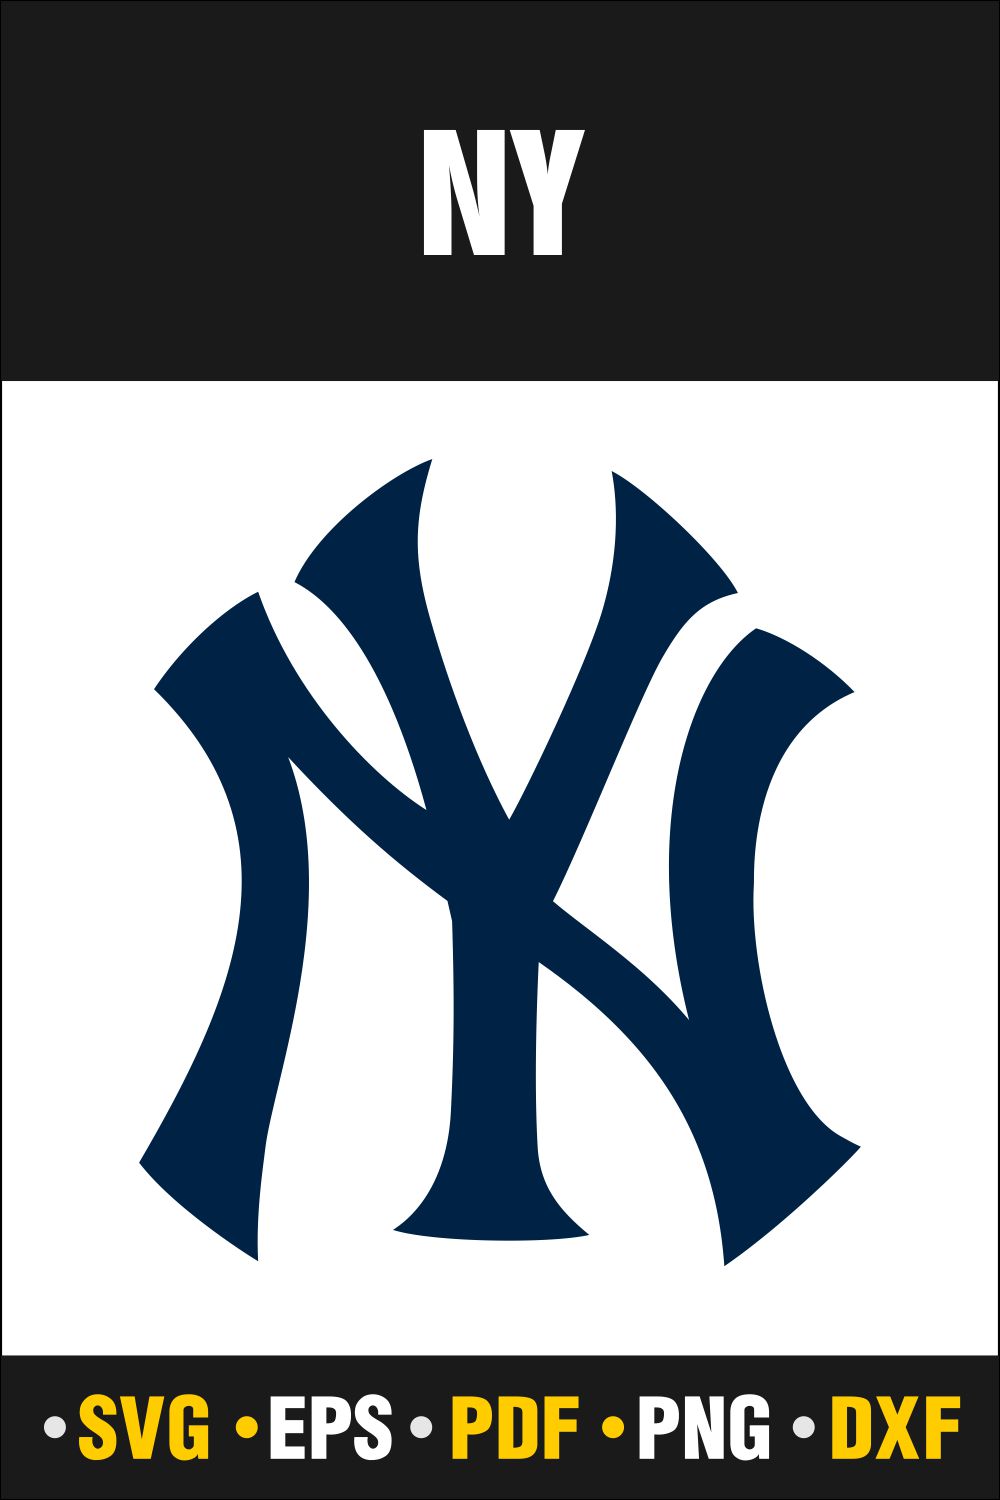 New York Yankees Svg, NY Svg Vector Cut file Cricut, Silhouette, Pdf Png, Dxf, Decal, Sticker, Stencil, Vinyl pinterest preview image.